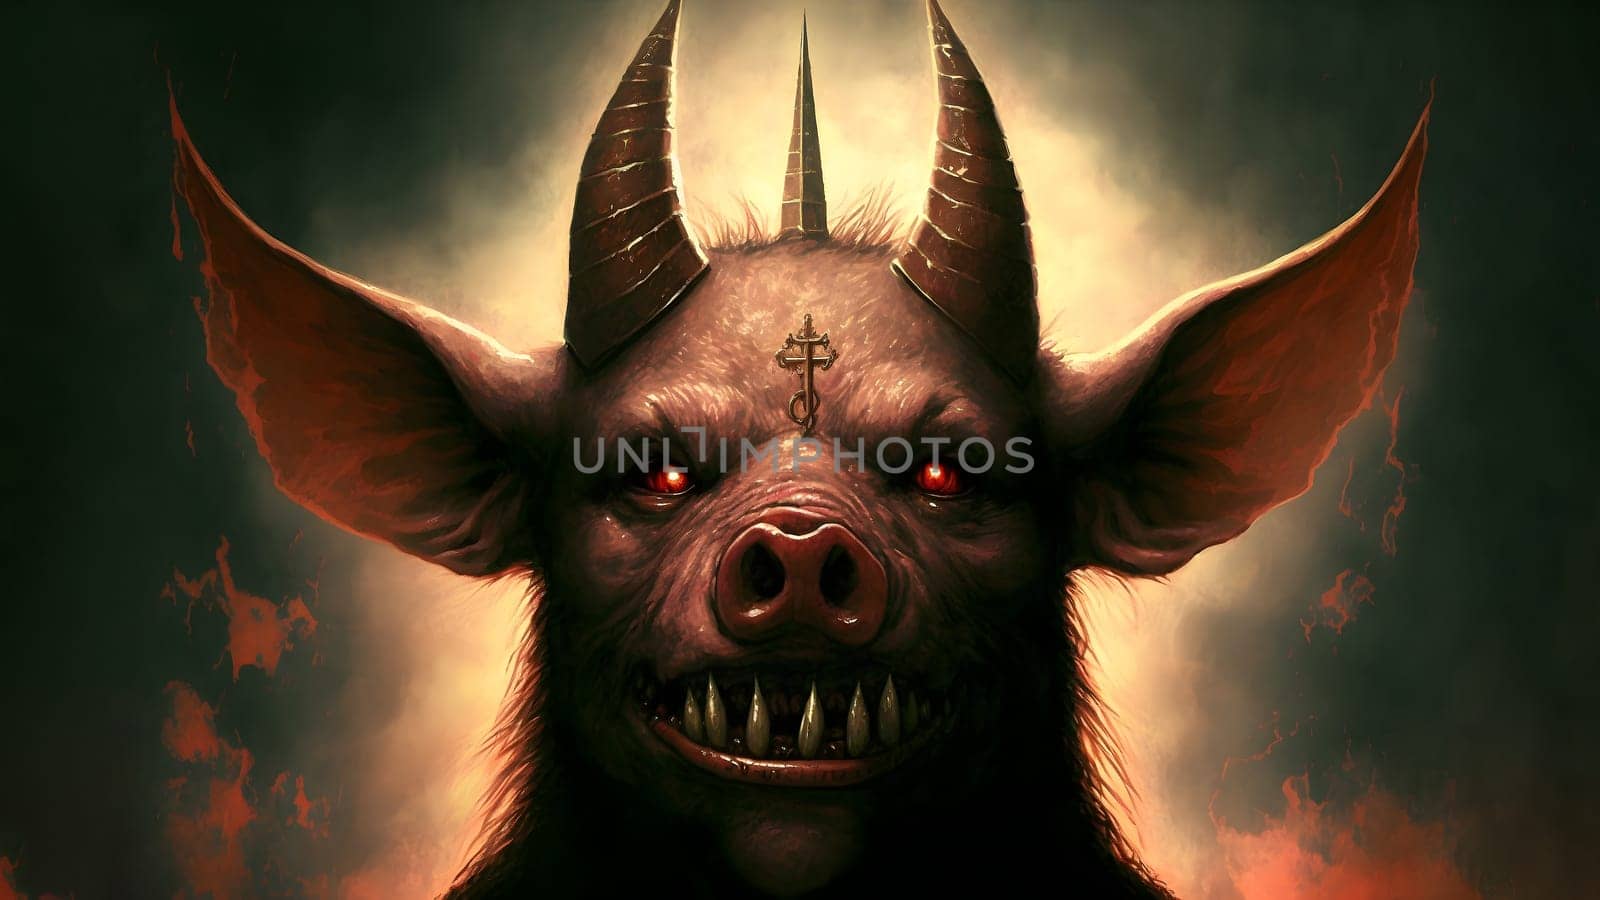 hellish satans underswine, neural network generated art. Digitally generated image. Not based on any actual person, scene or pattern.